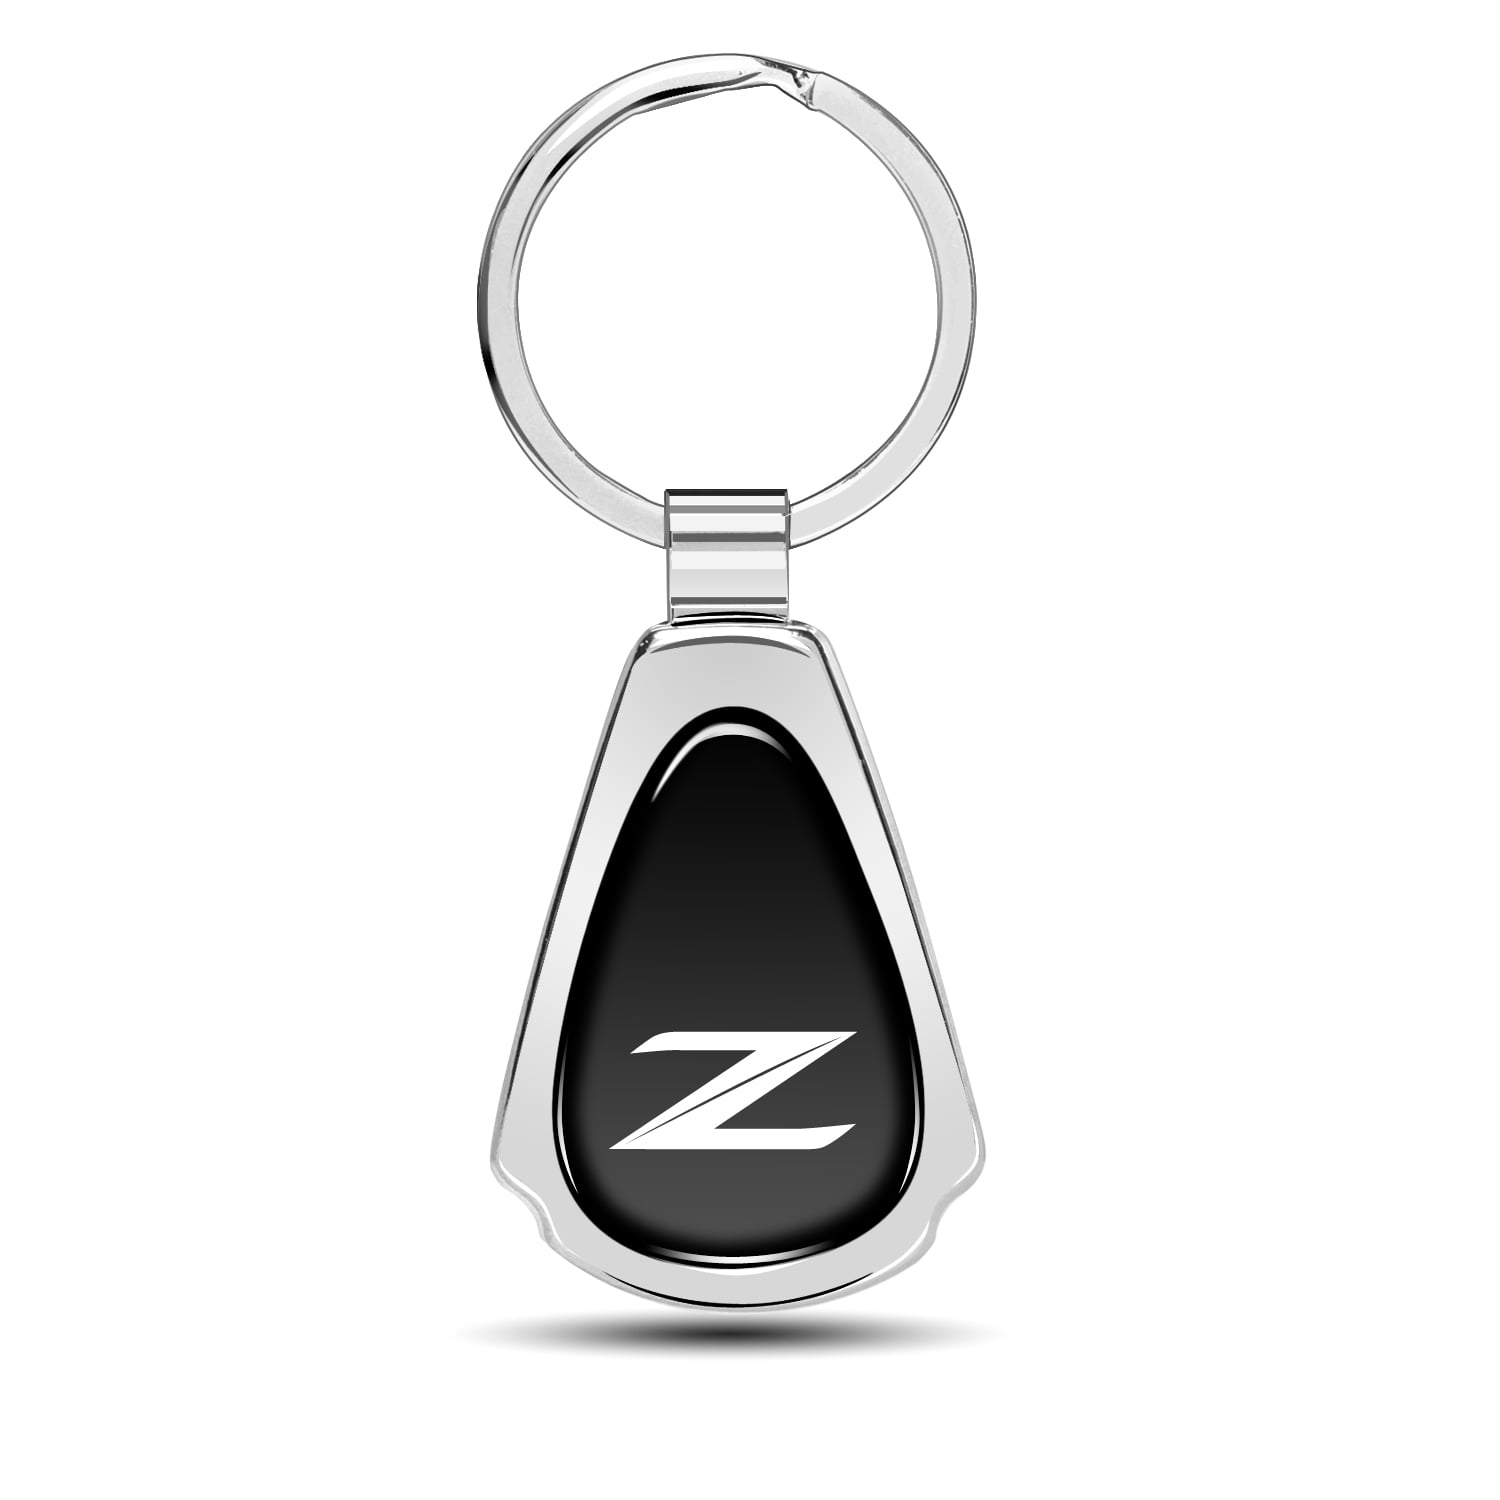 Citystores Key Ring Non-fading Decorative Electroplated A-Z 26 Letter Metal Key Chain Charm for Promotional Gifts,B, Women's, Size: One size, Grey